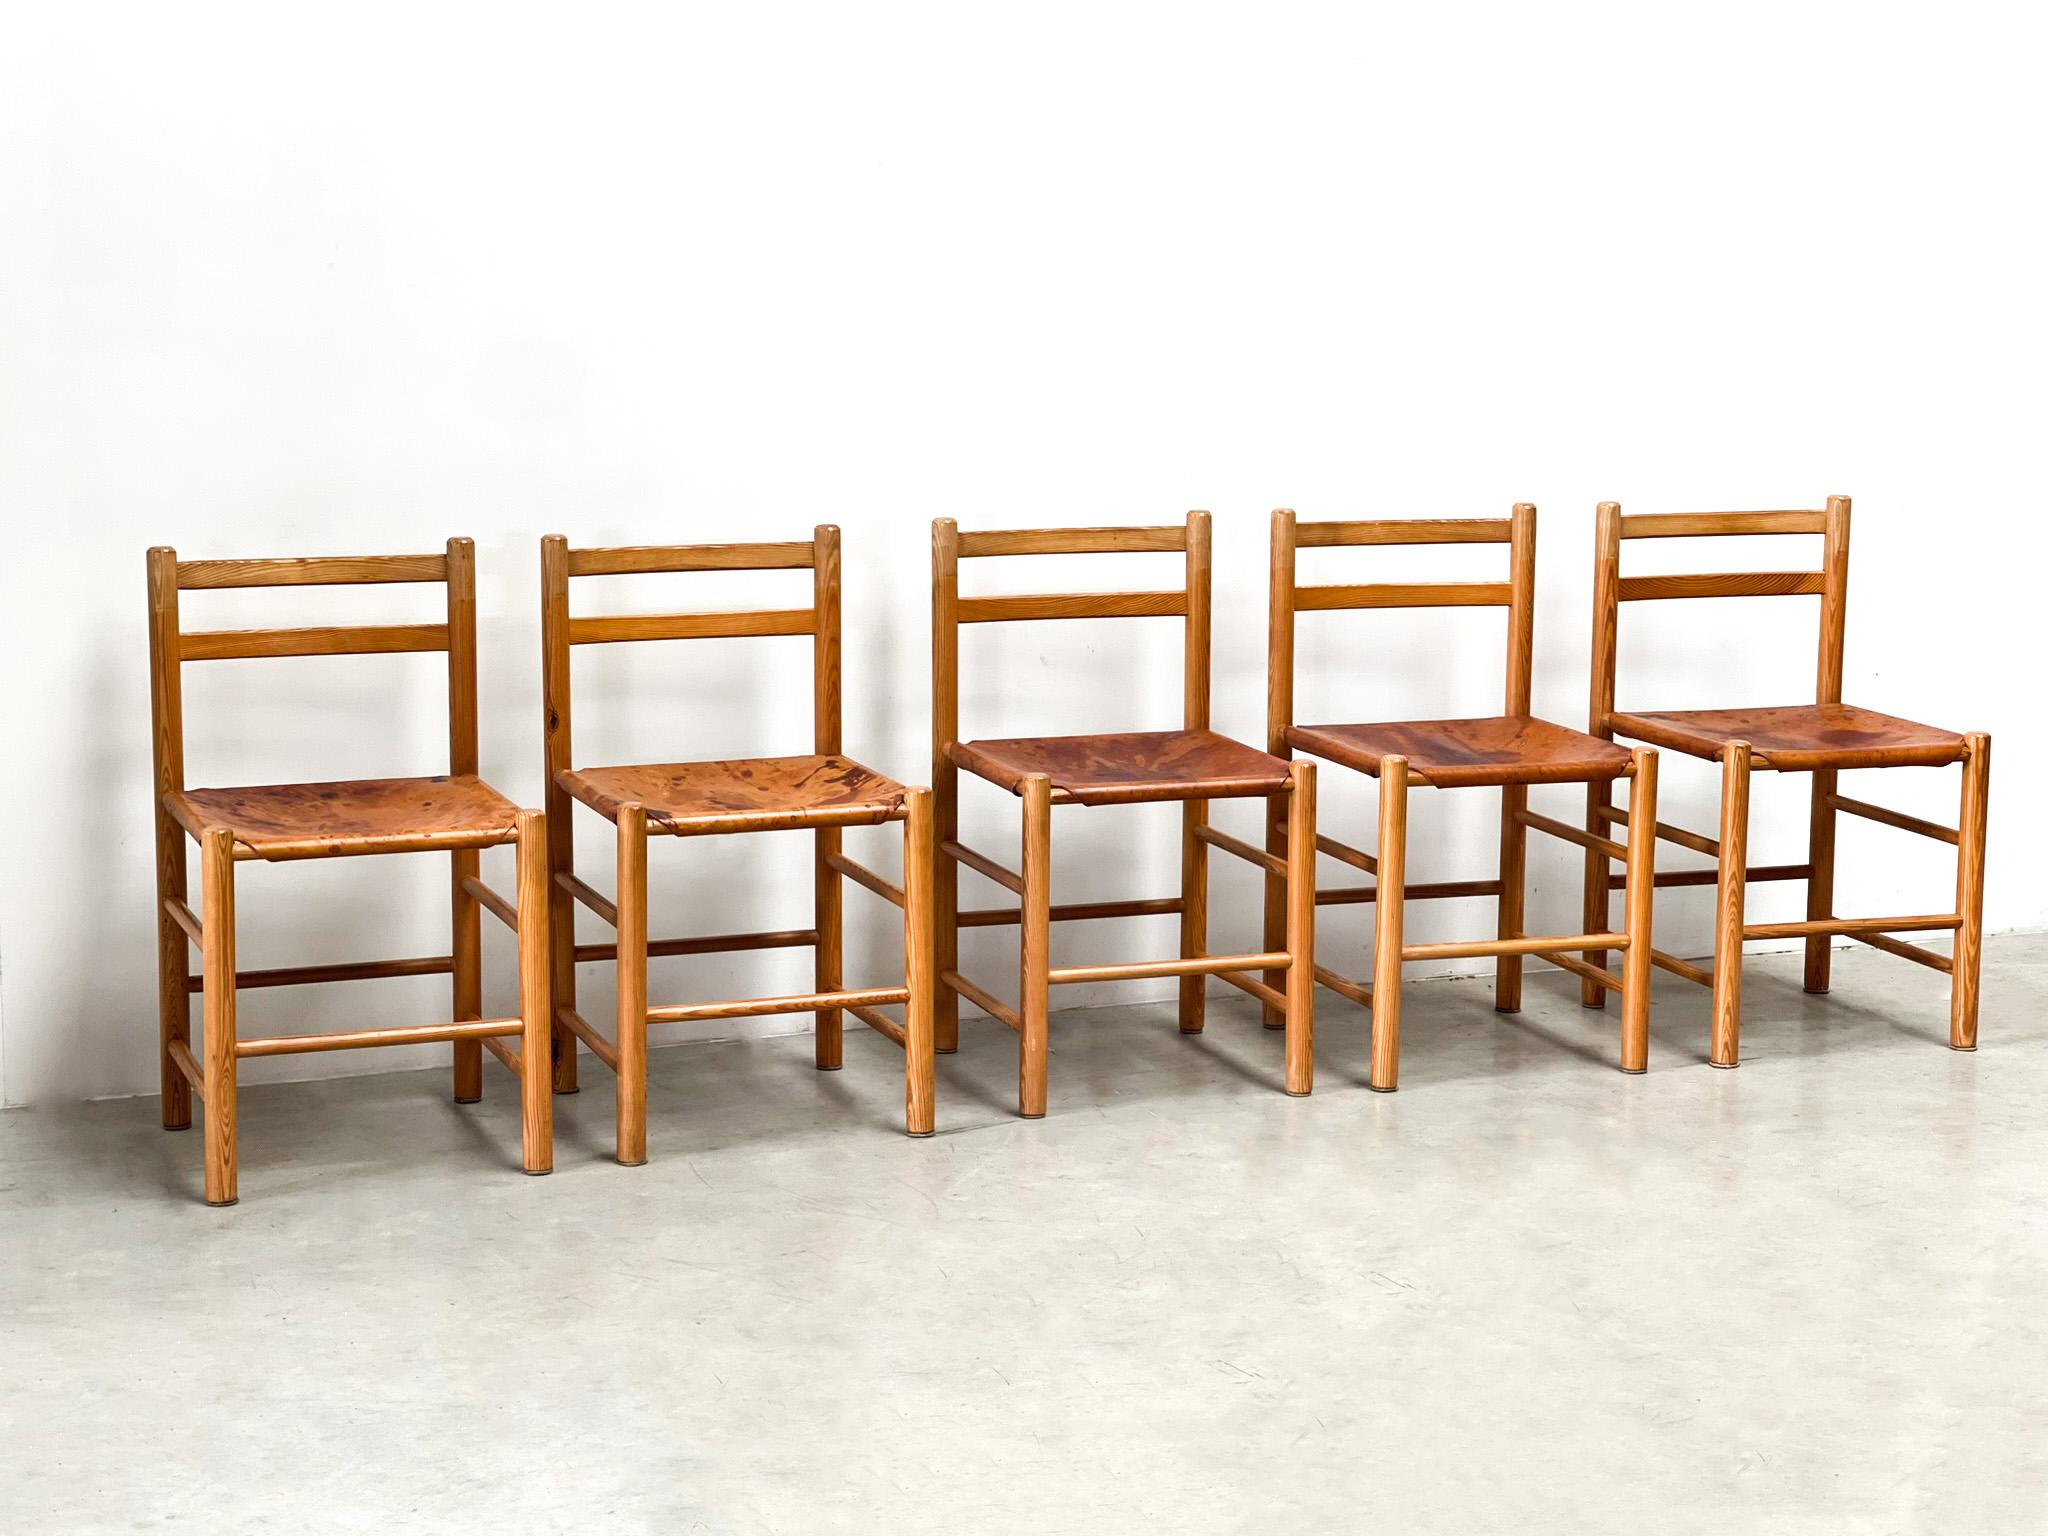 Ate van Apeldoorn
Look at this patina. you can't fake it. These are five chairs designed by famous dutch designer Ate Van apeldoorn. He designed these chairs in the 1960s for the company houtwerk hattum. This is a very early set and then again the